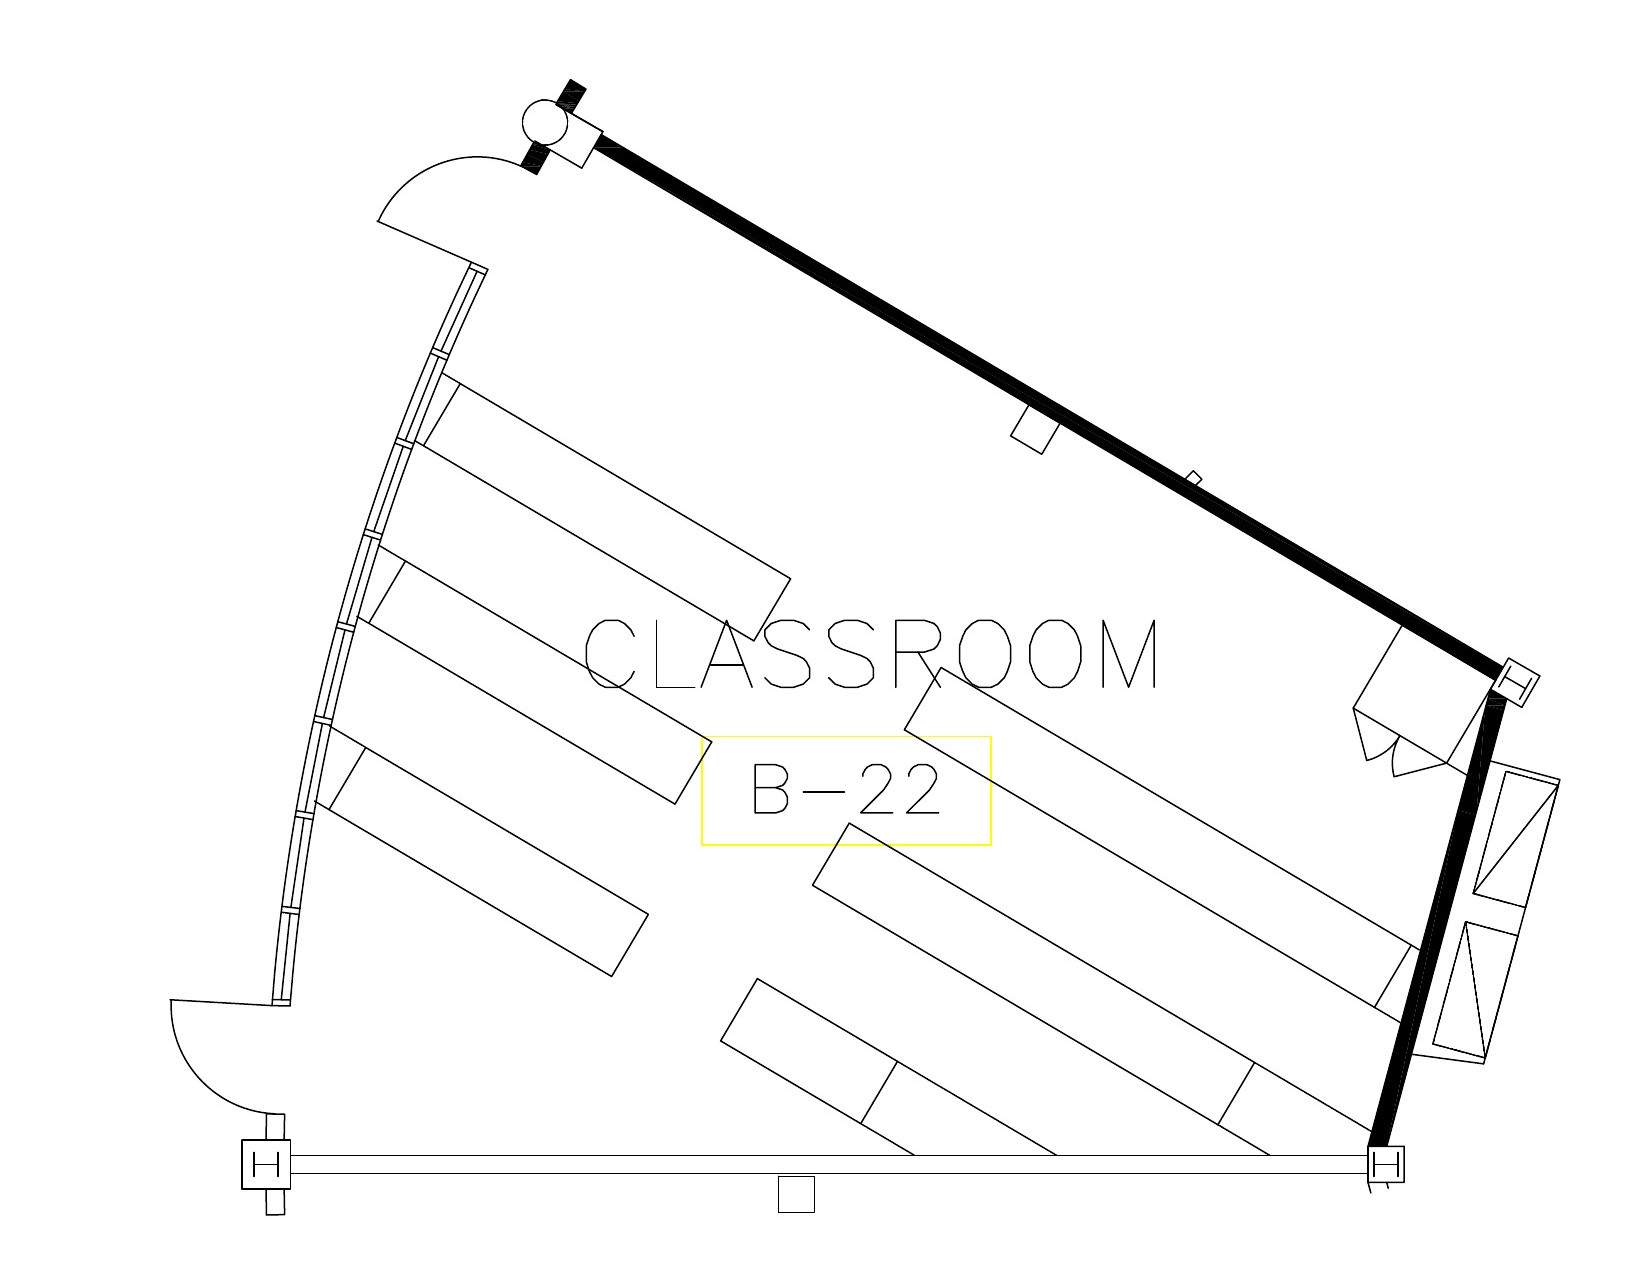 Seating chart of Bauer 22